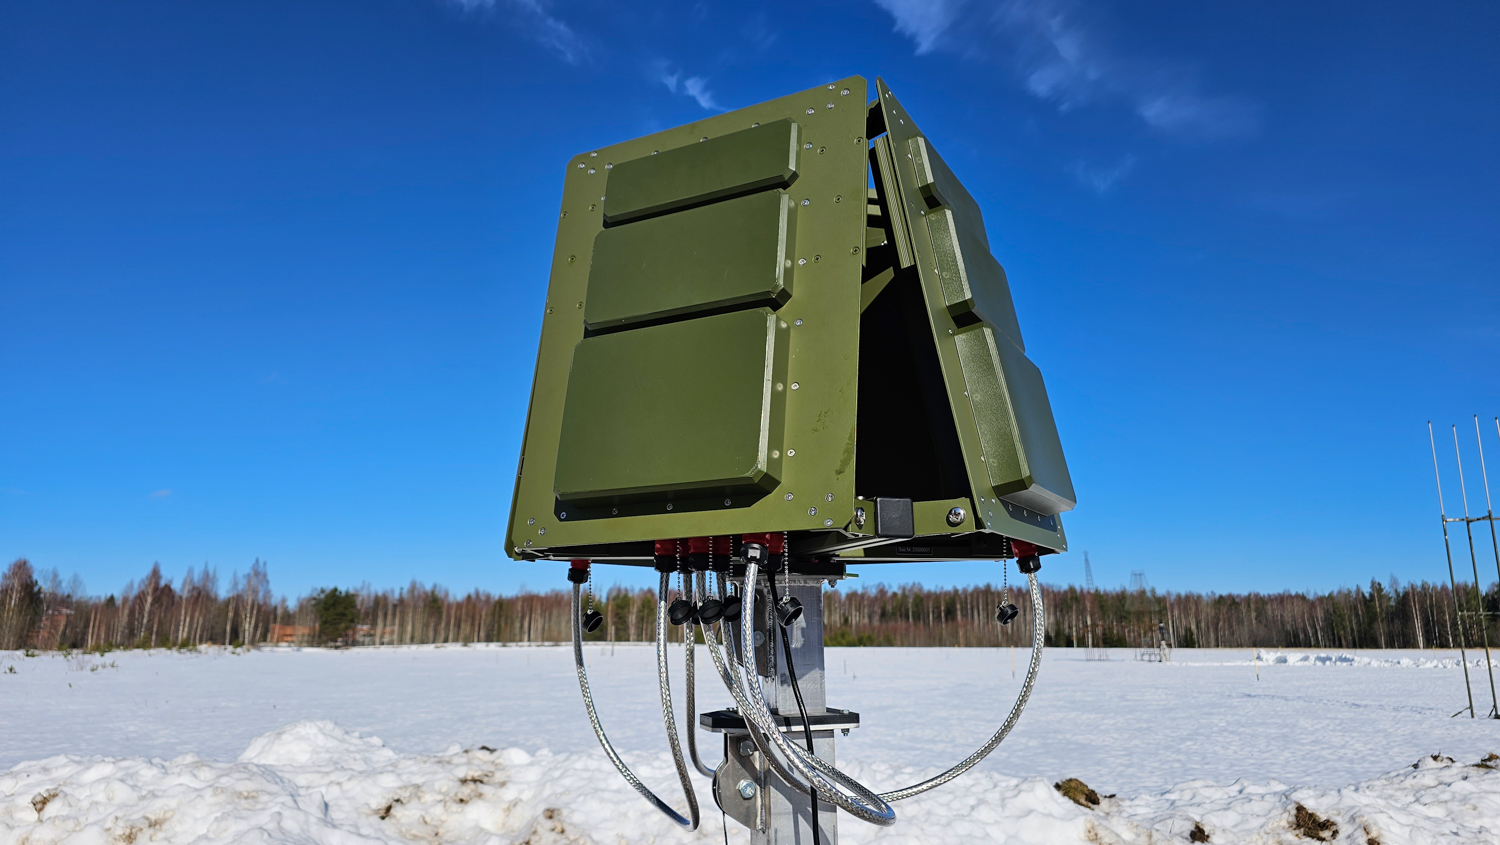 Rostec has Presented a Log-Range System for Fighting Swarm of Drones